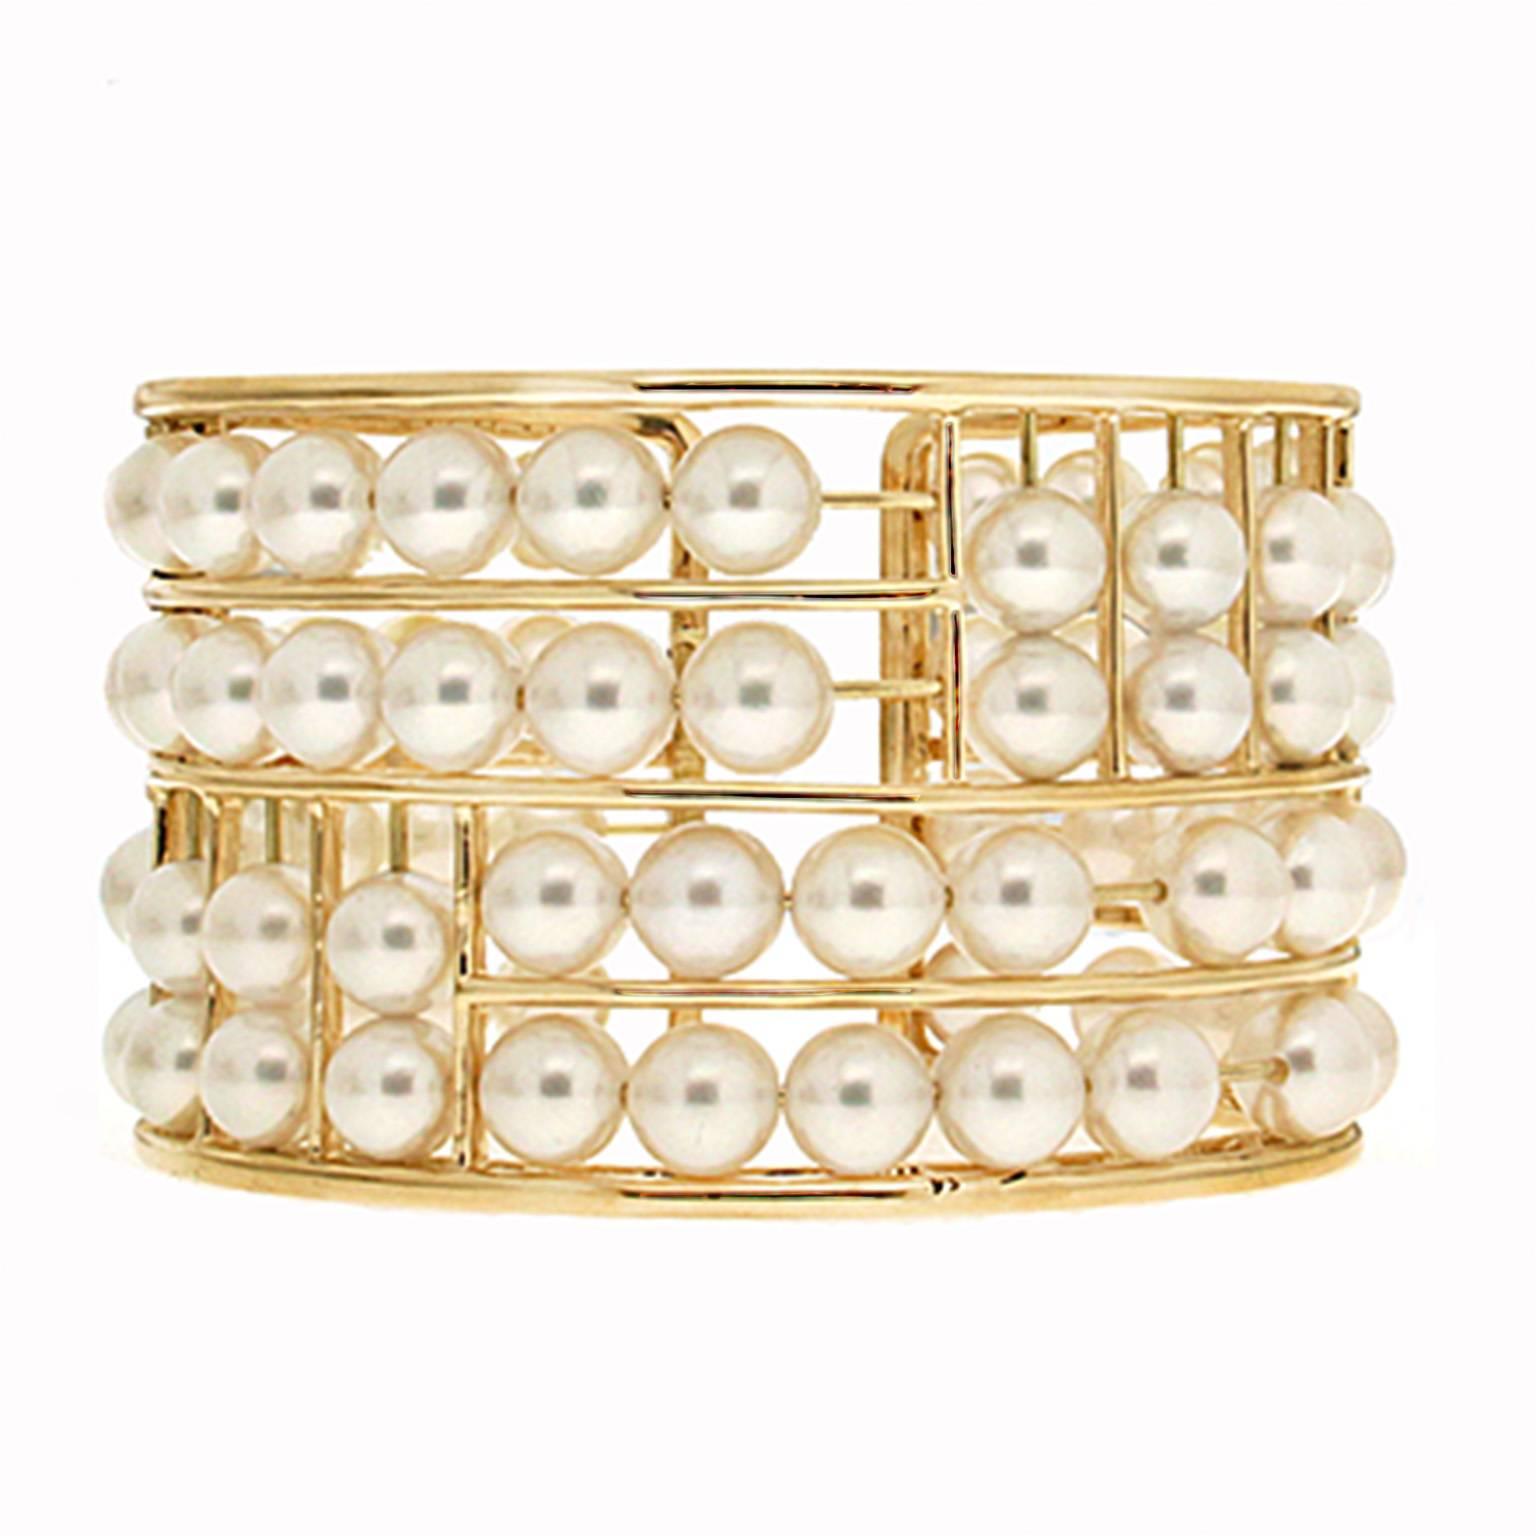 Pearls provide a lustrous complement to this bracelet. 18k yellow gold forms the cuff, which has varying openwork rows. Akoya pearls are strung on gold wires in these rows, giving the impression to be floating. The total weight of the pearls is 76